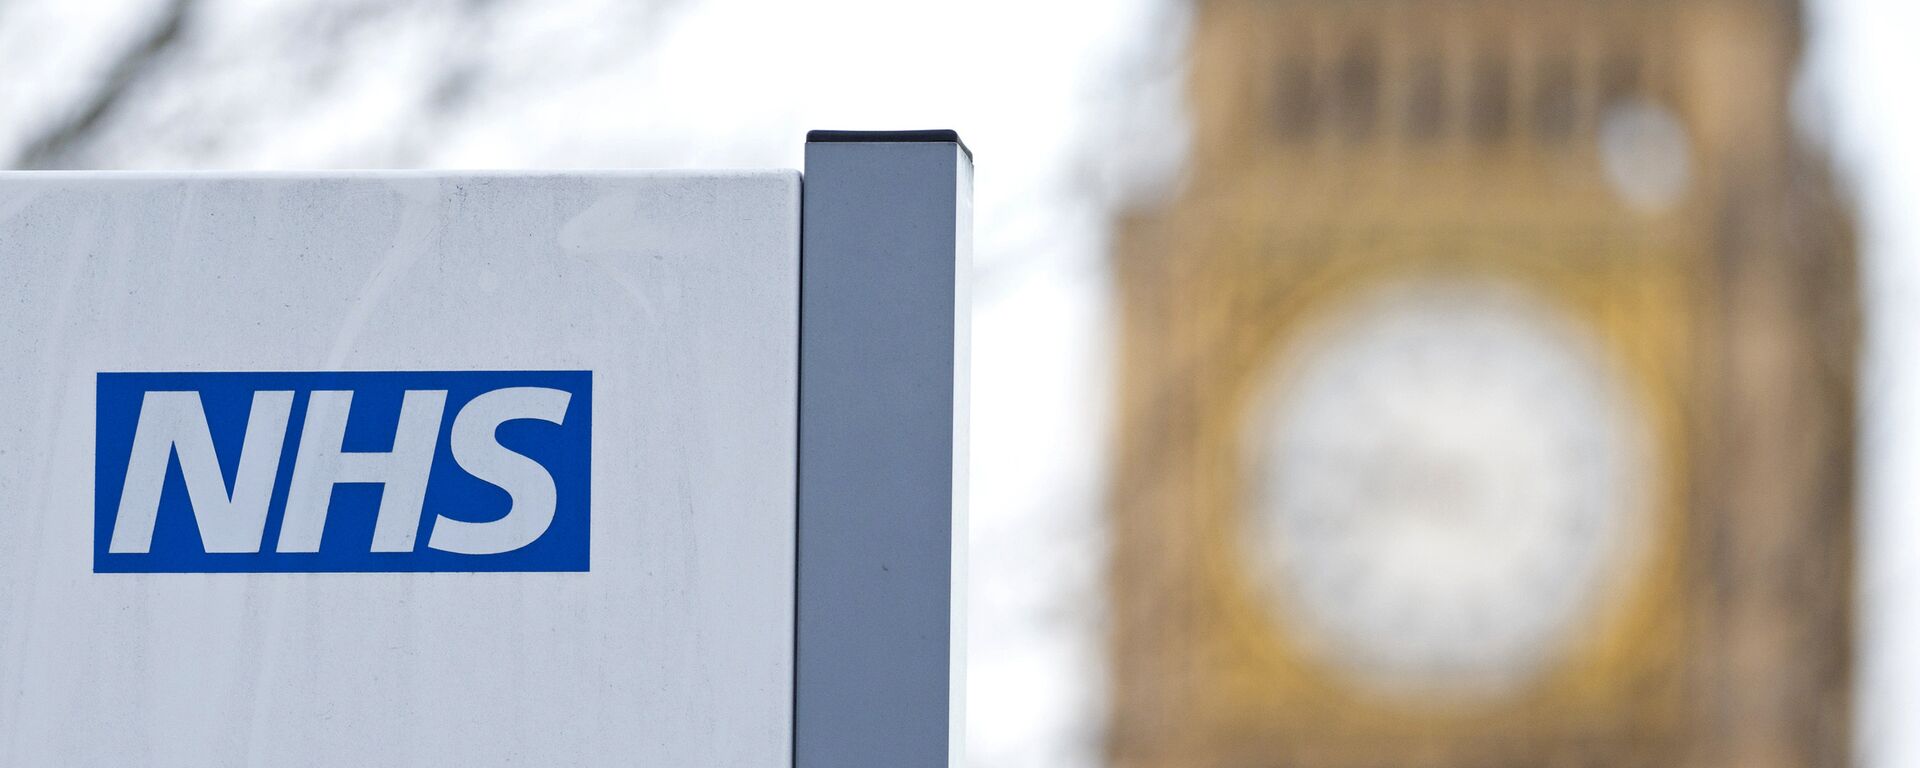 An NHS sign is pictured at St Thomas' Hospital in front of the Big Ben clock face and the Elizabeth Tower on January 13, 2017 in London.  - Sputnik International, 1920, 30.03.2022